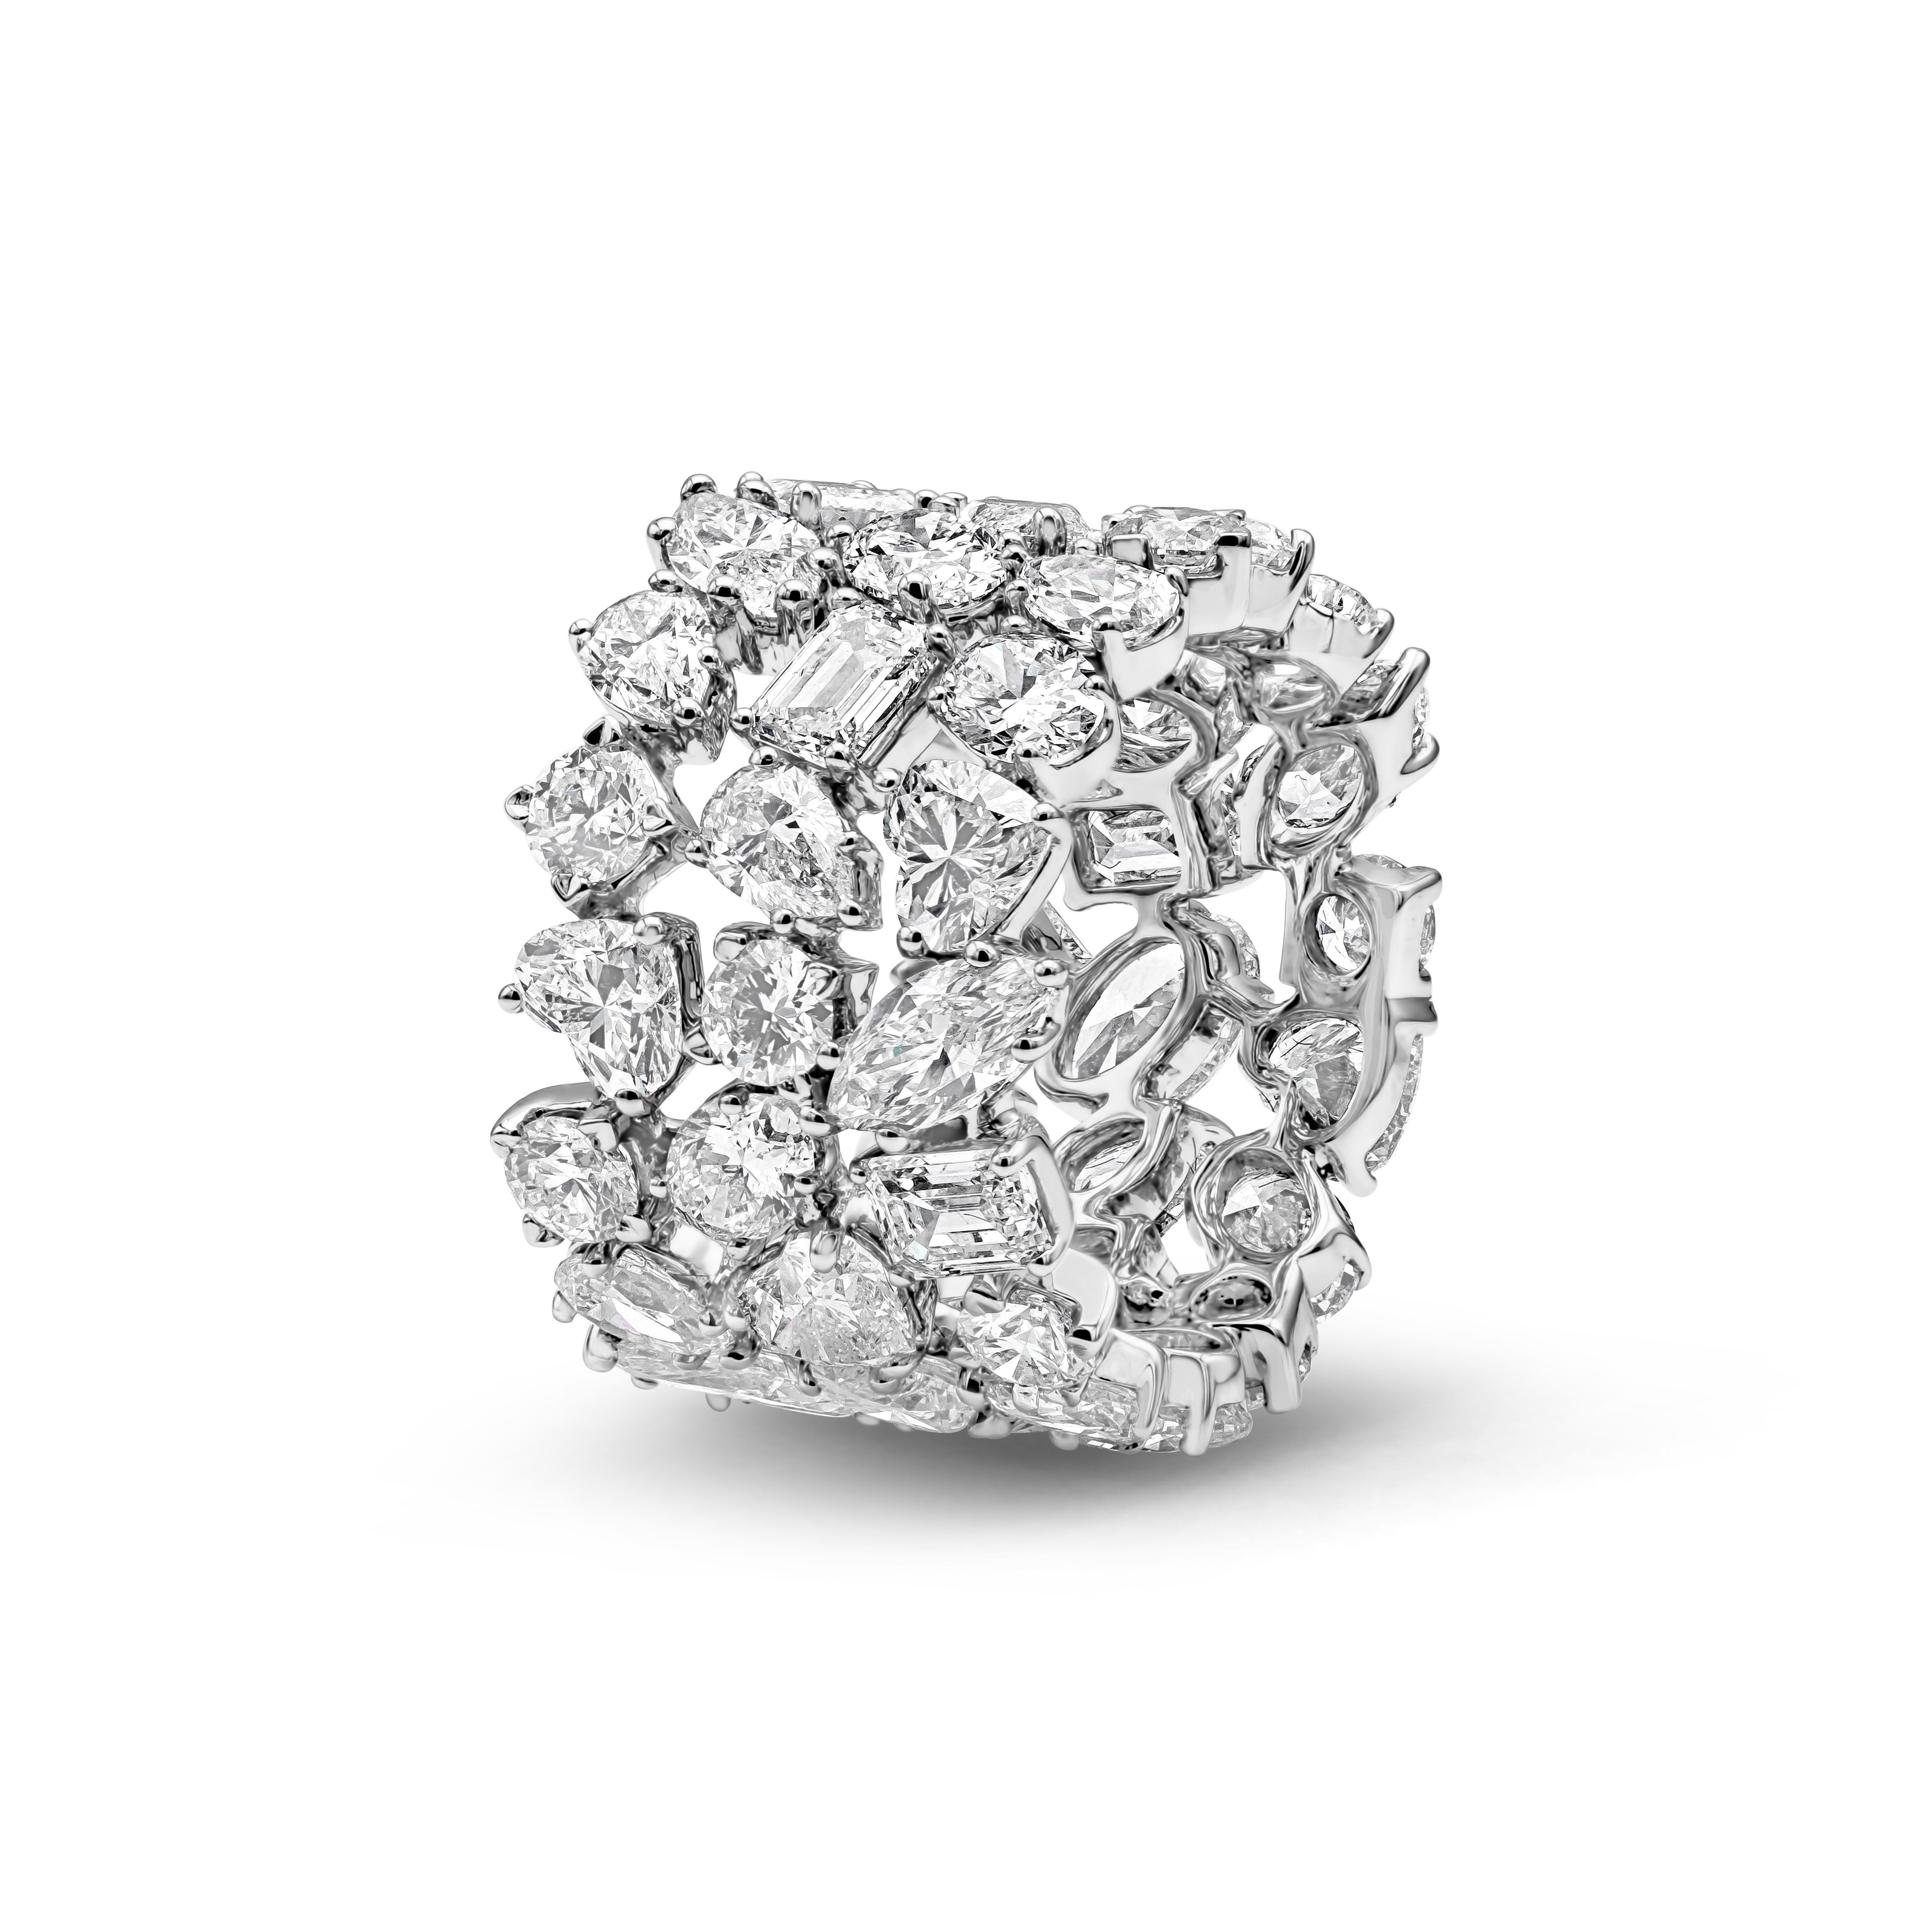 This unique and well crafted piece of jewelry showcasing a magnificent three-rows of mixed fancy cut diamonds set in an open-work, floating diamond design that consist of marquise, oval, brilliant round, heart shape and emerald cut made in 18 karat